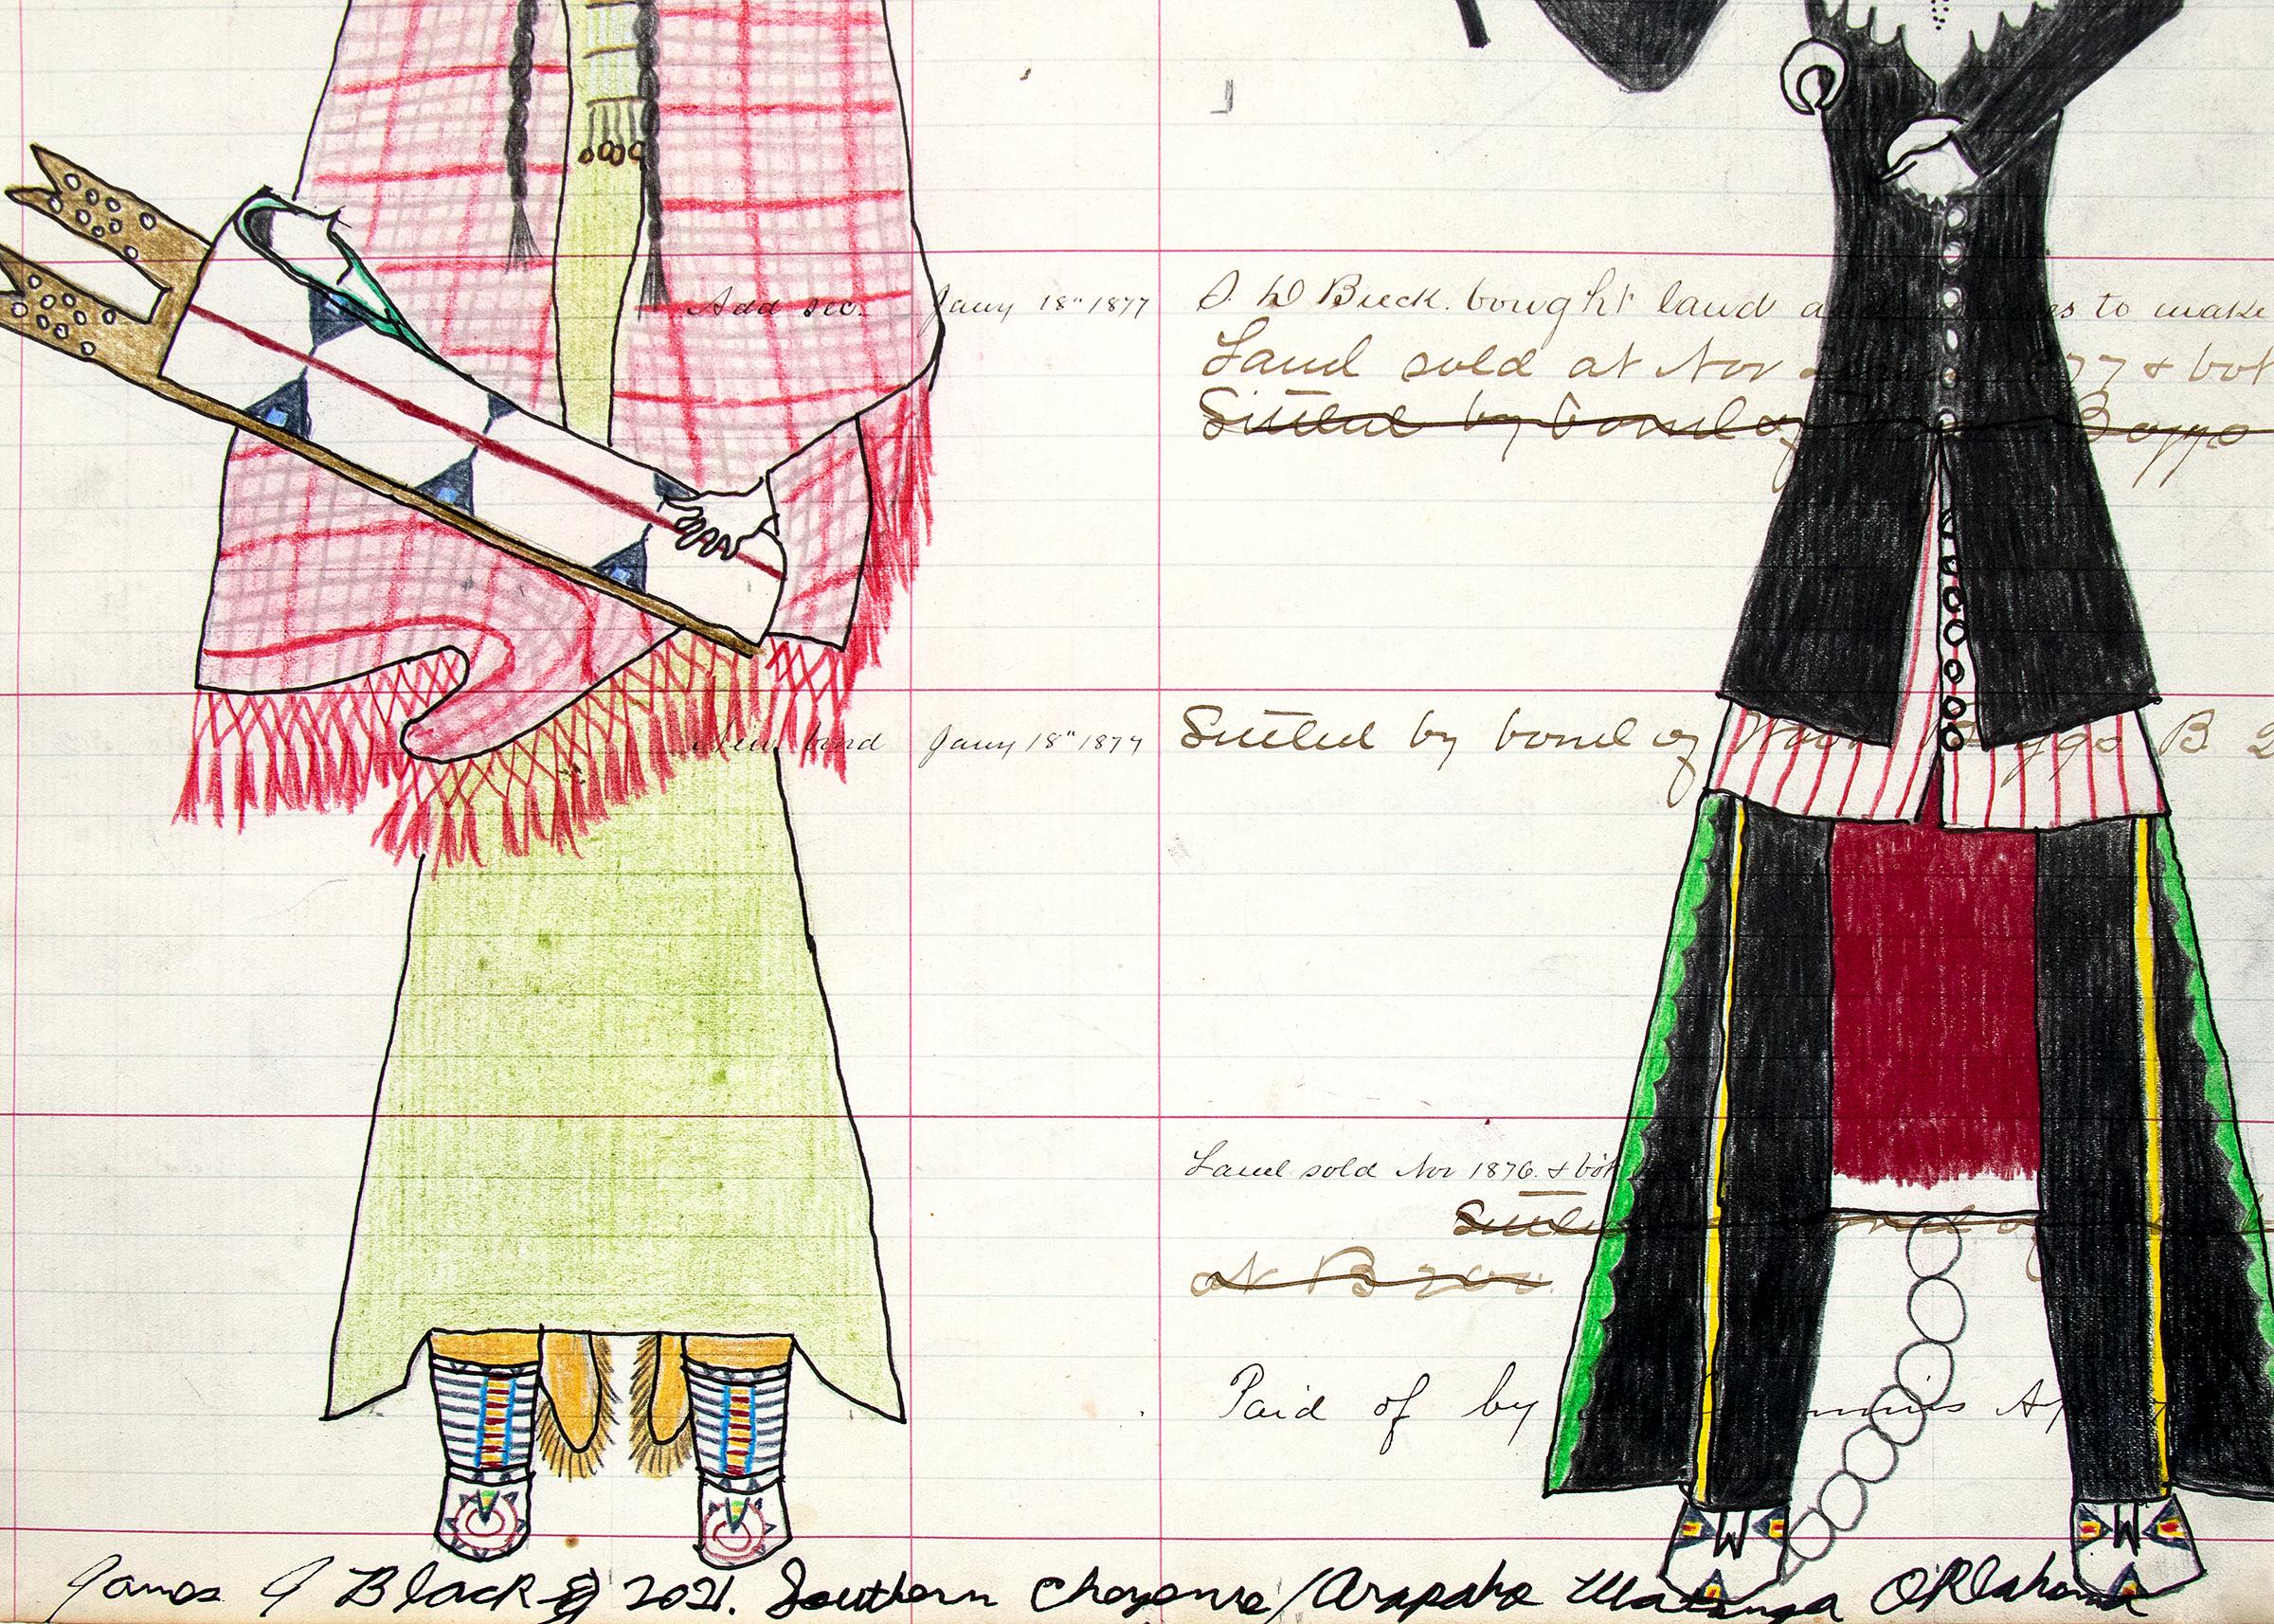 Cheyenne Woman and Man with Baby in Cradle by contemporary Native American artist, James Black, Cheyenne/Arapahoe. Crayon and marker on antique ledger paper marked 